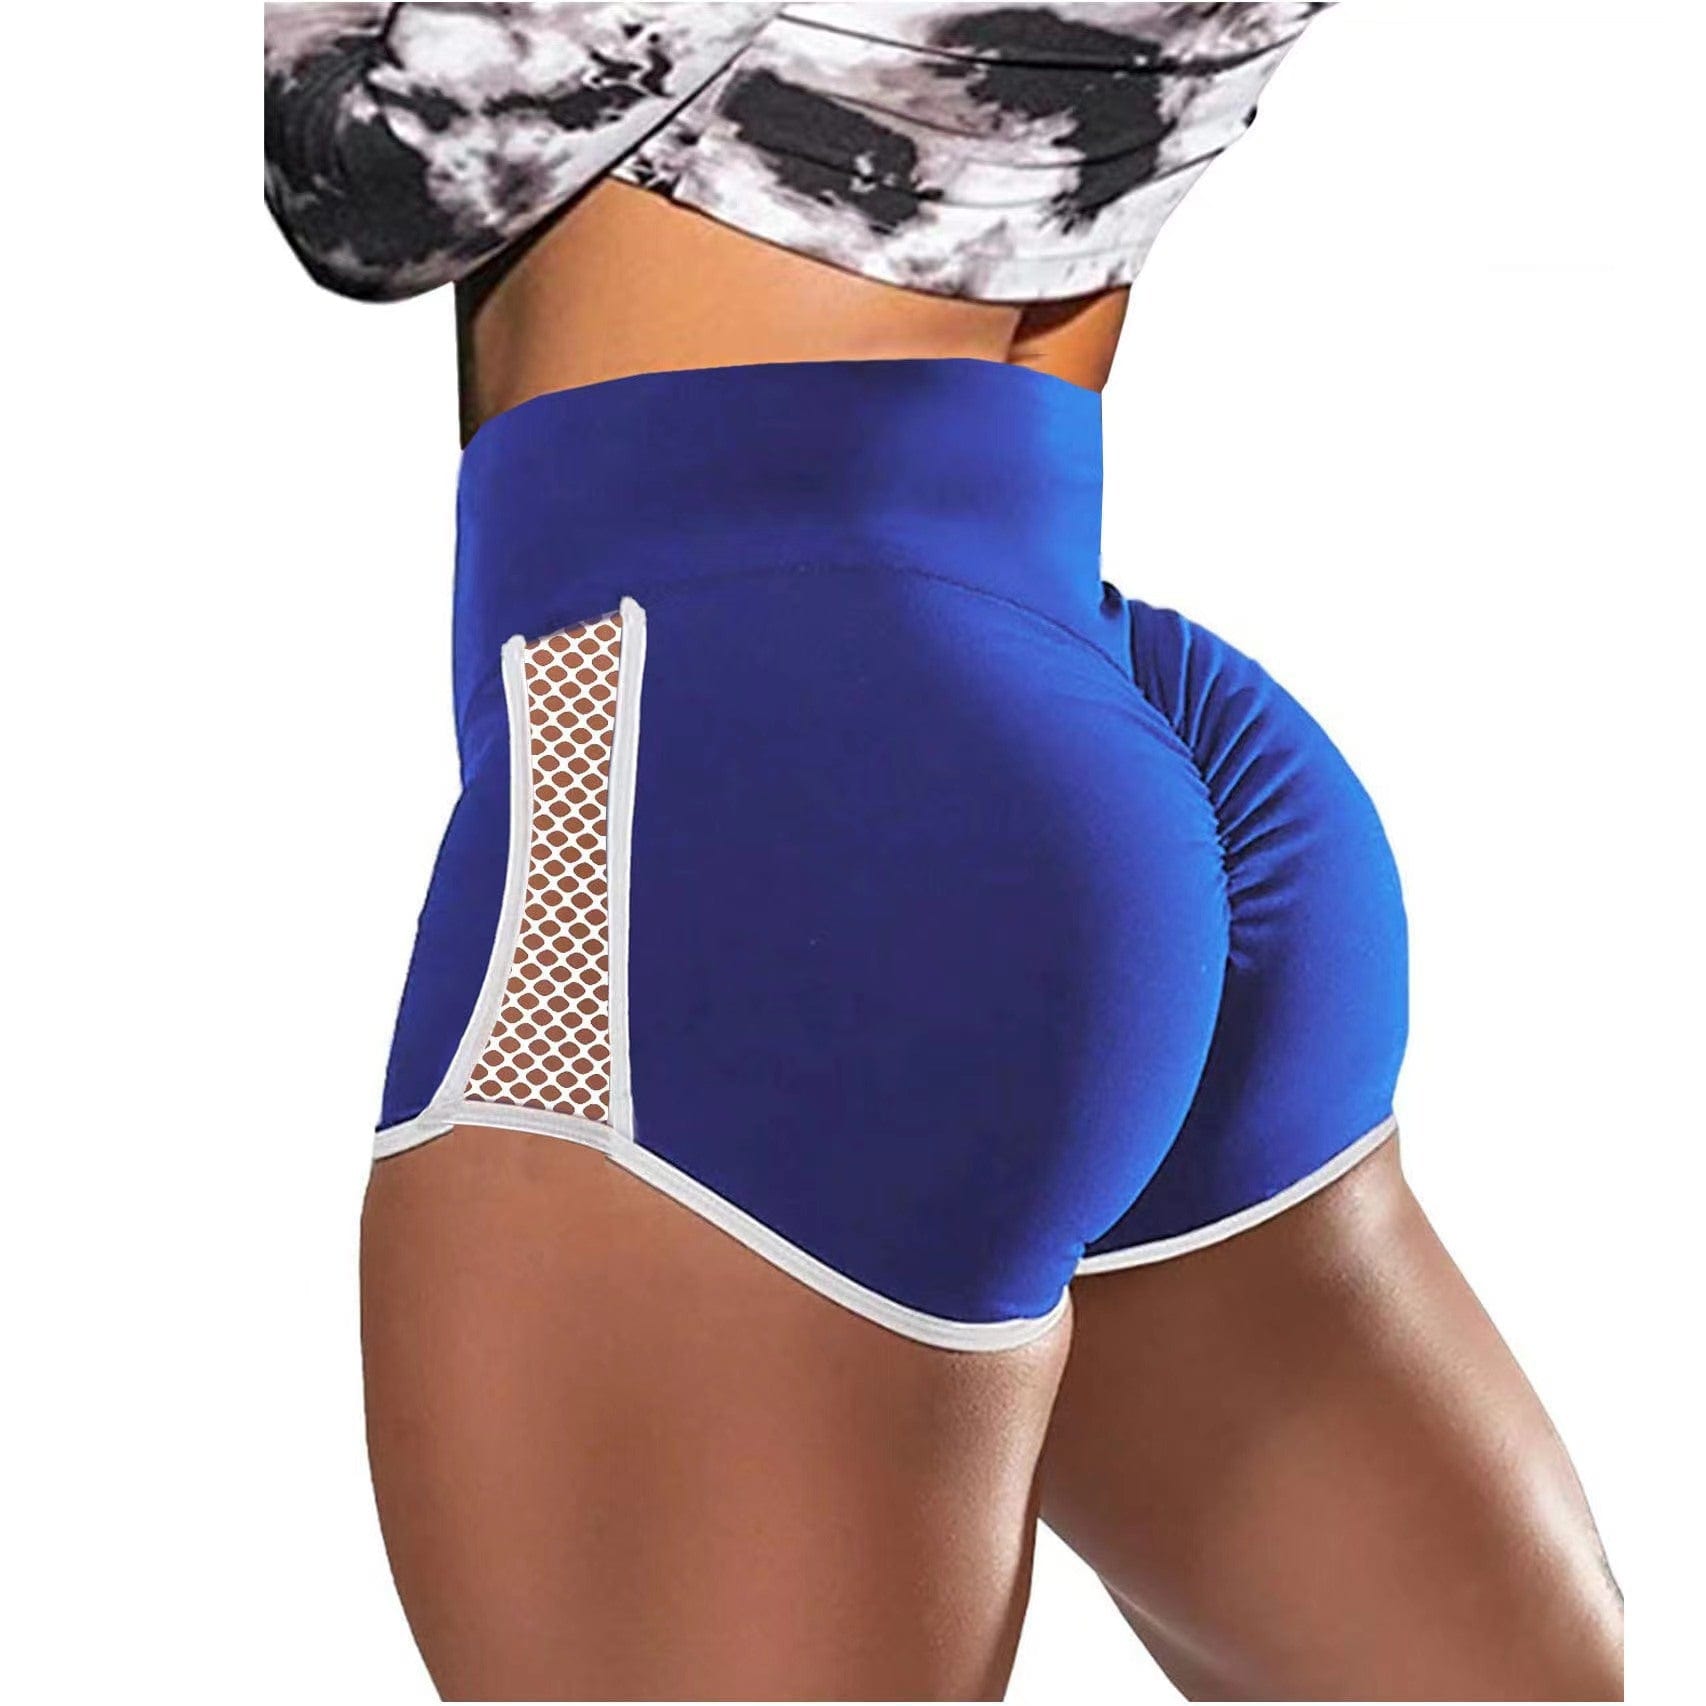 ALLRJ Cross-border European And American Foreign Trade Shorts High Waist Shaping Shorts Fitness Sports Pants Hollow Out Stitching Shorts